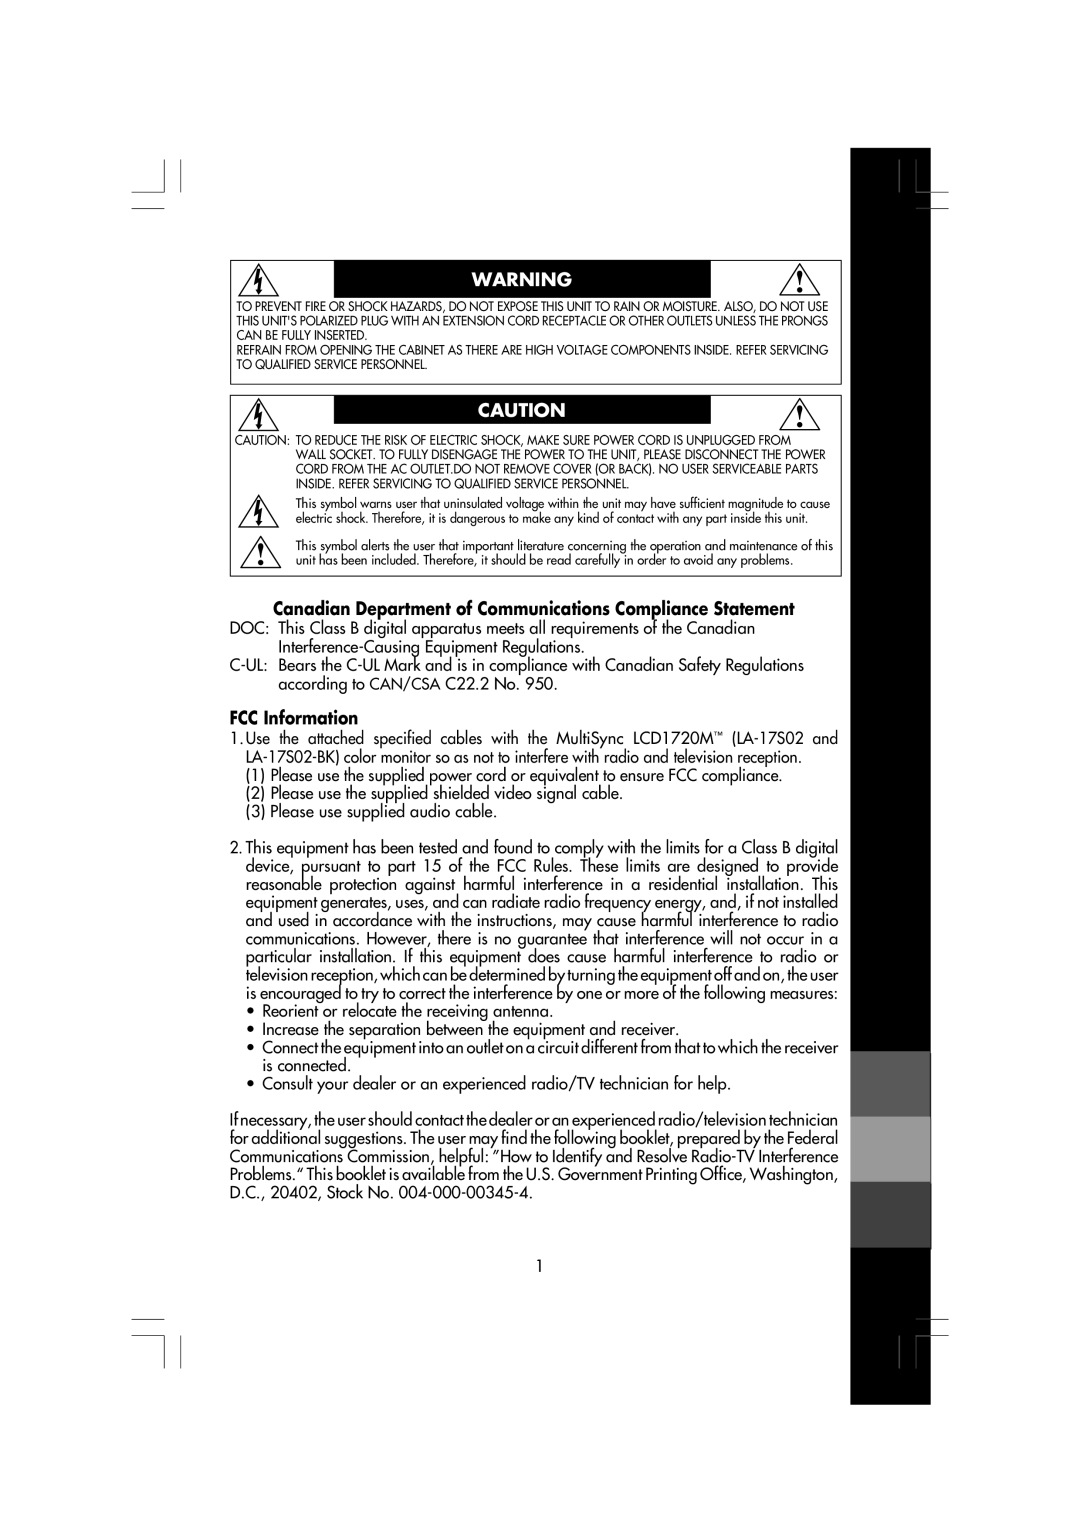 Mitsubishi Electronics LCD1720M manual Canadian Department of Communications Compliance Statement, FCC Information 